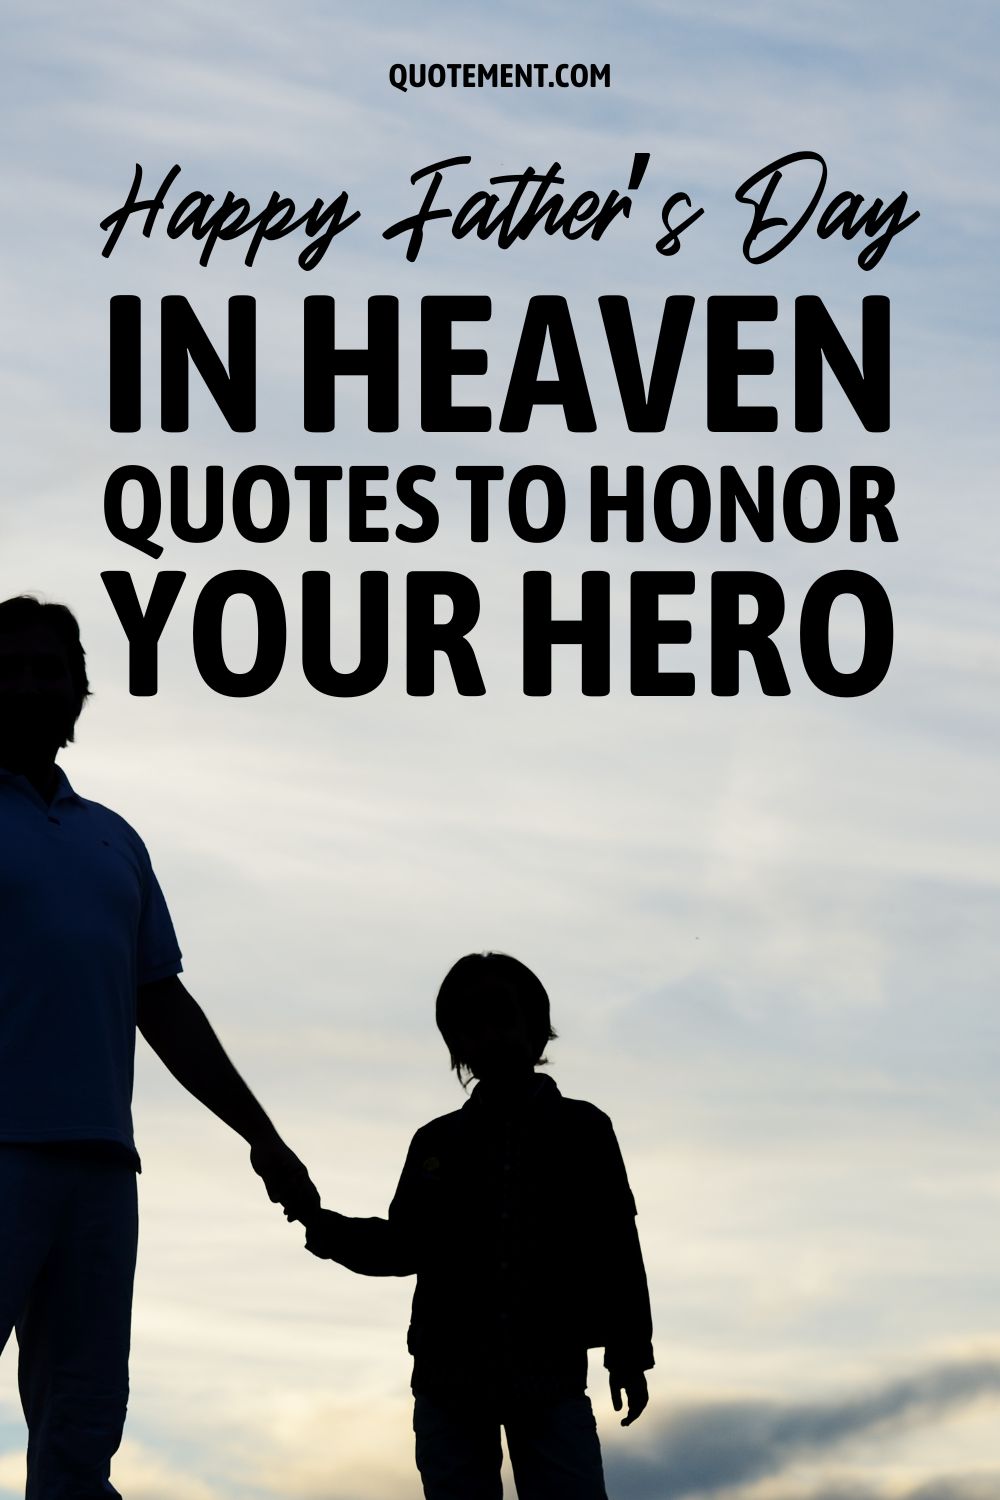 100 Happy Father’s Day In Heaven Quotes To Honor Your Hero
